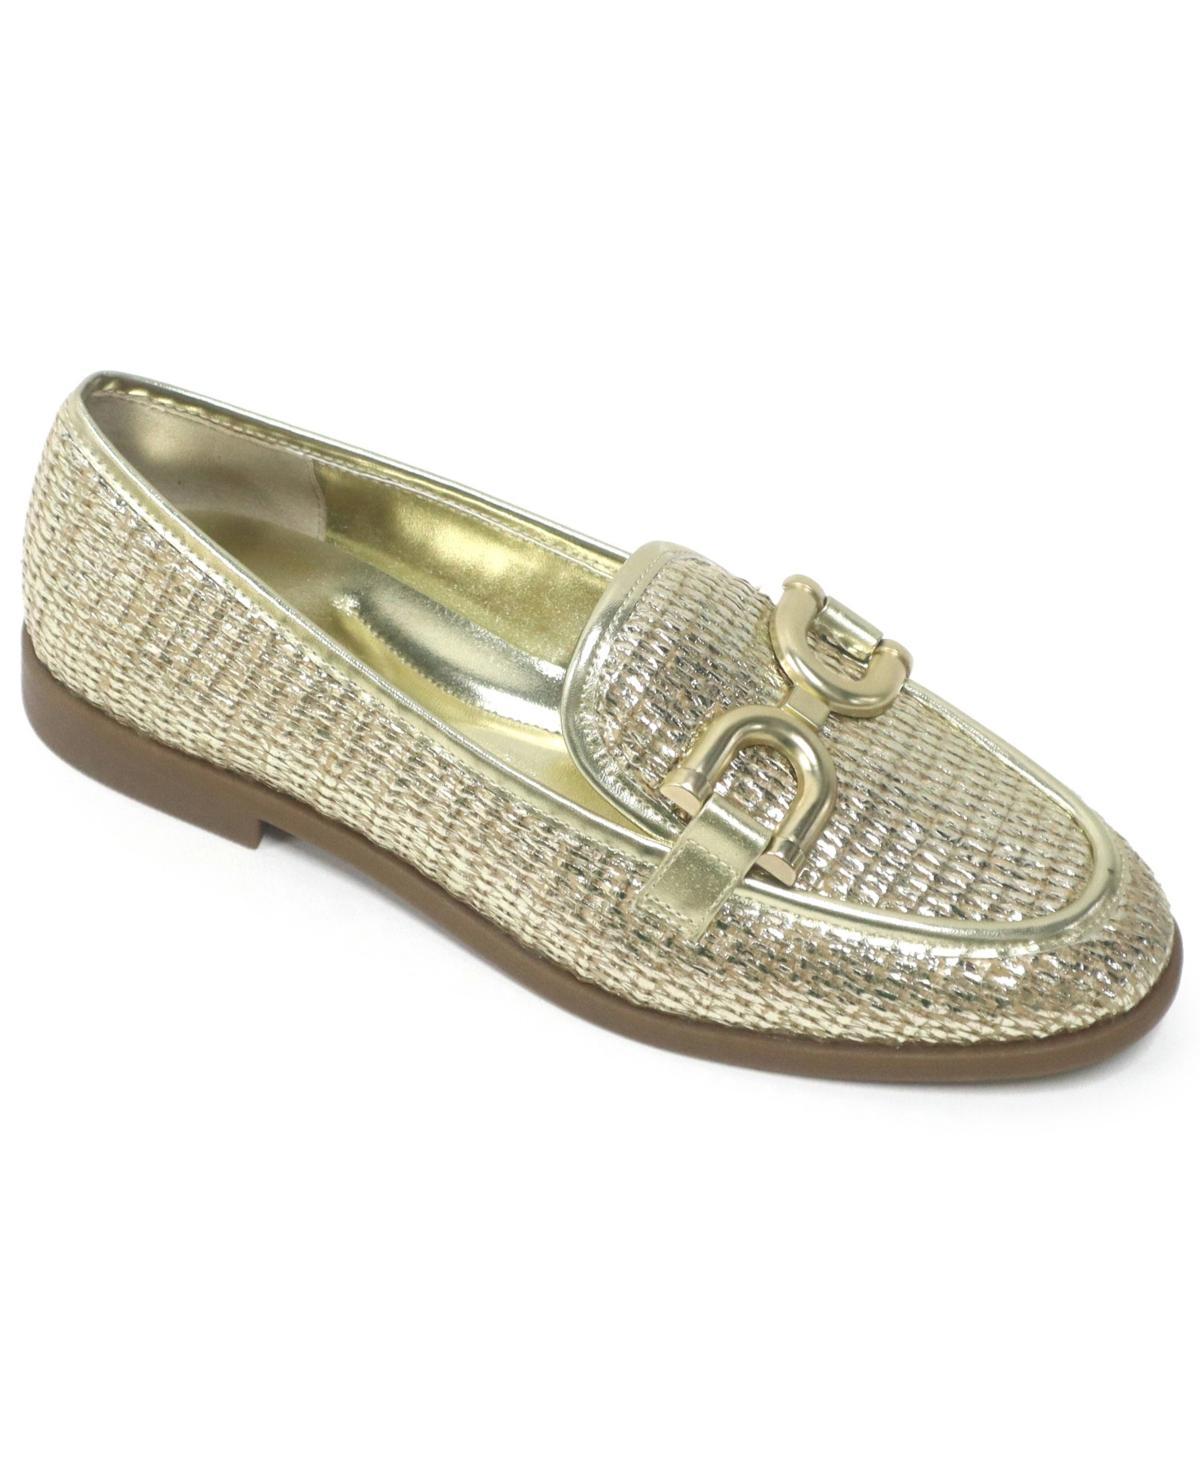 Kenneth Cole New York Womens Linda Bit Raffia Loafers Product Image